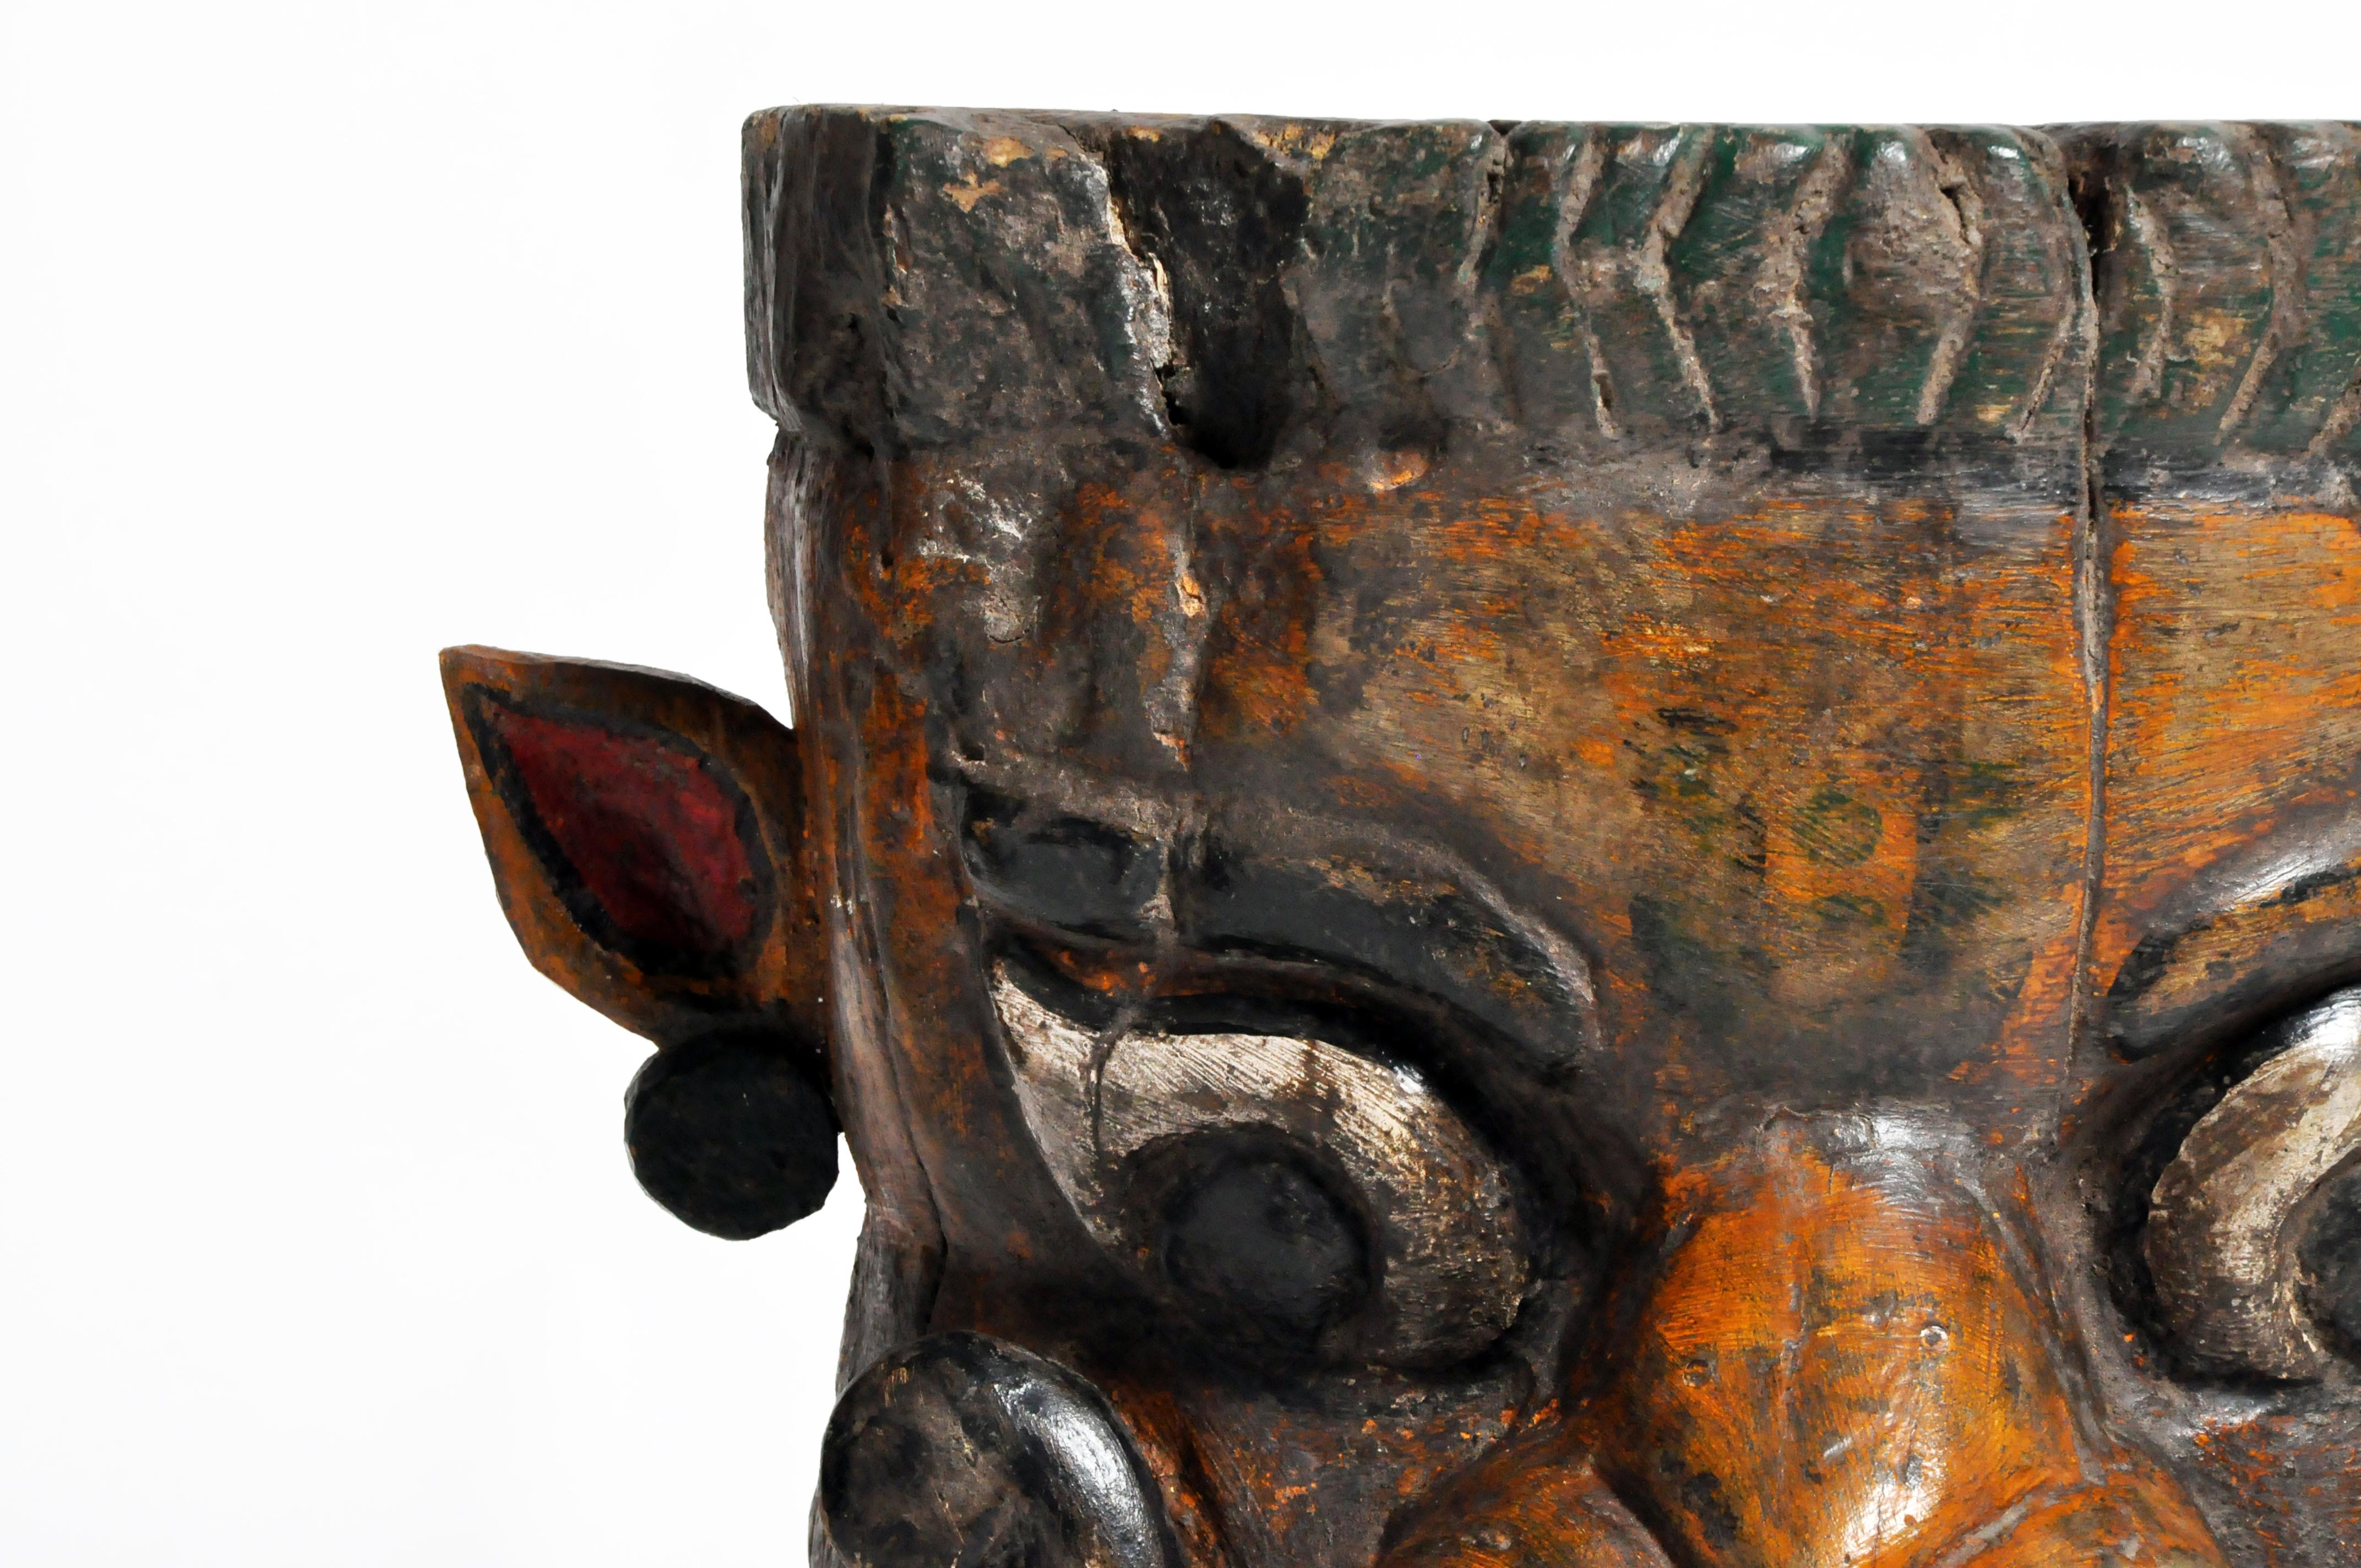 Indian Wooden Mask 4